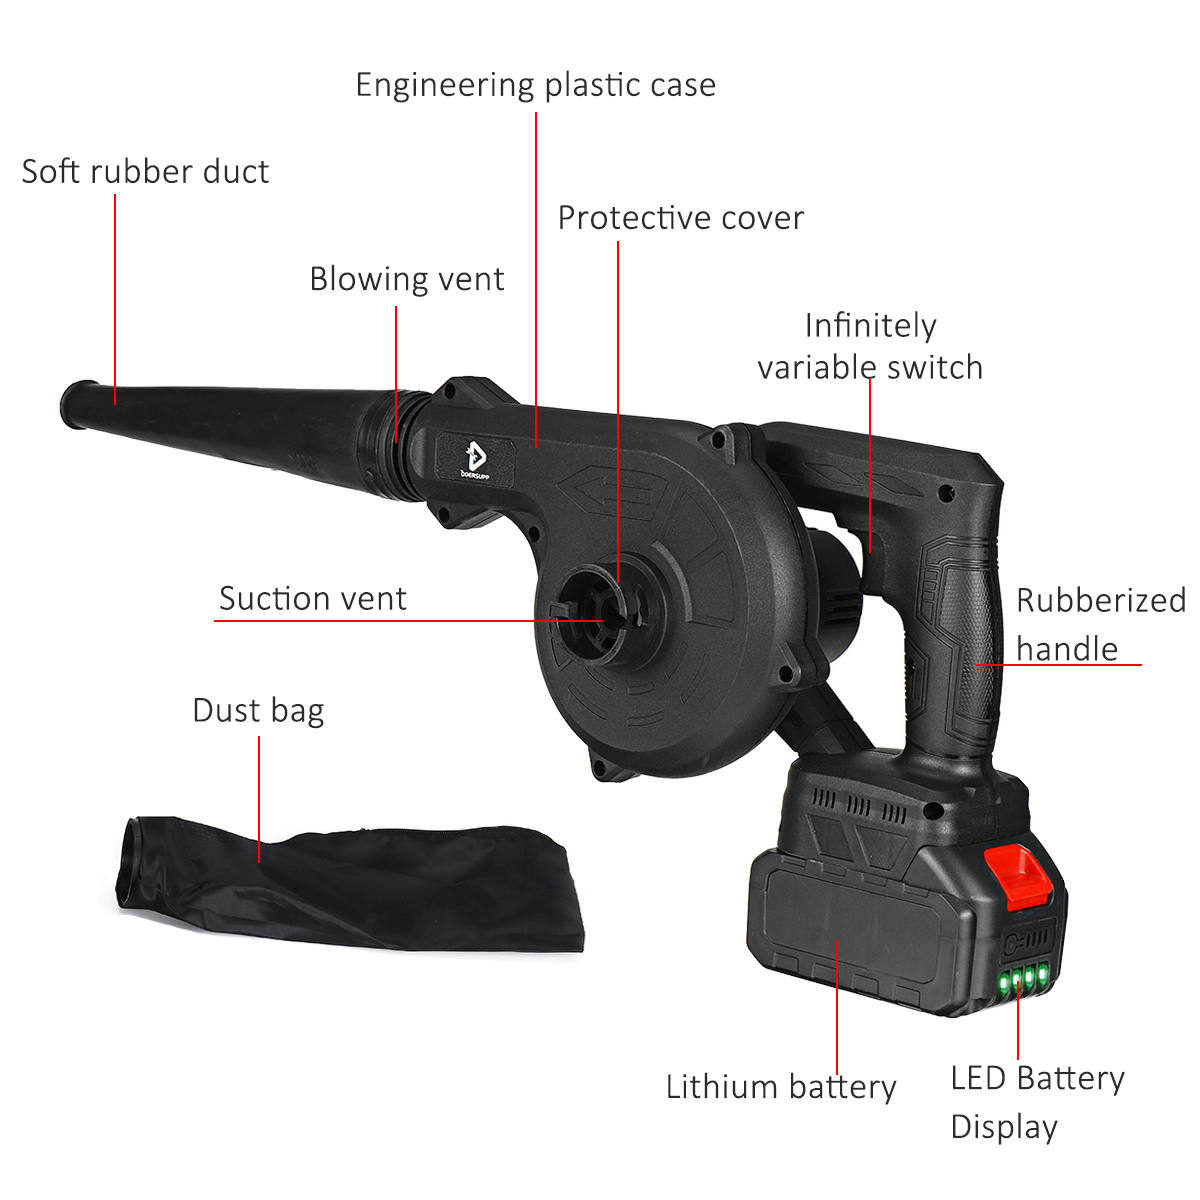 Doersupp-21V-1000W-Cordless-Electric-Air-Blower-Vacuum-Suction-Cleaning-Leaf-Blower-Computer-Dust-Co-1863319-11